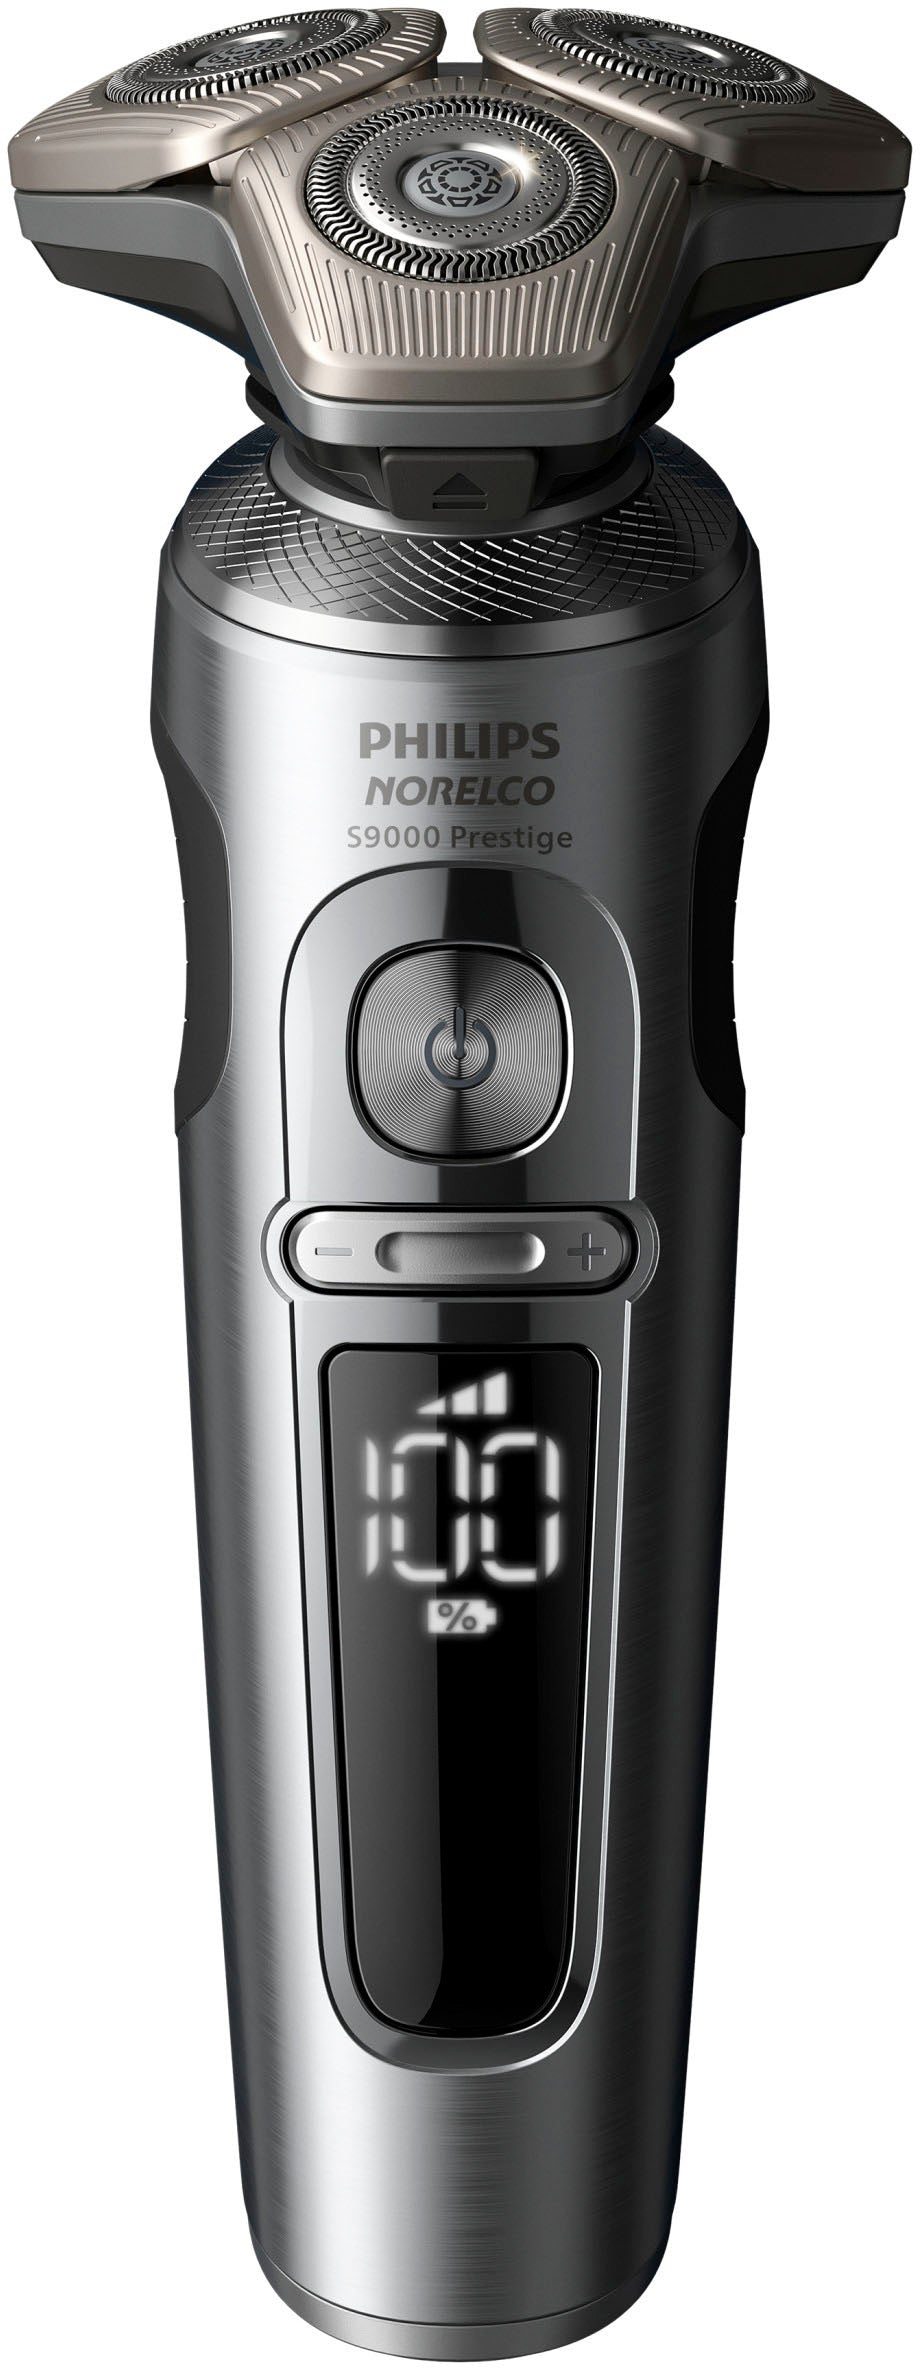 Philips Norelco S9000 Prestige Rechargeable Wet & Dry Shaver with Precision Trimmer and Premium Case, SP9841/84 - Light Brushed Chrome_4